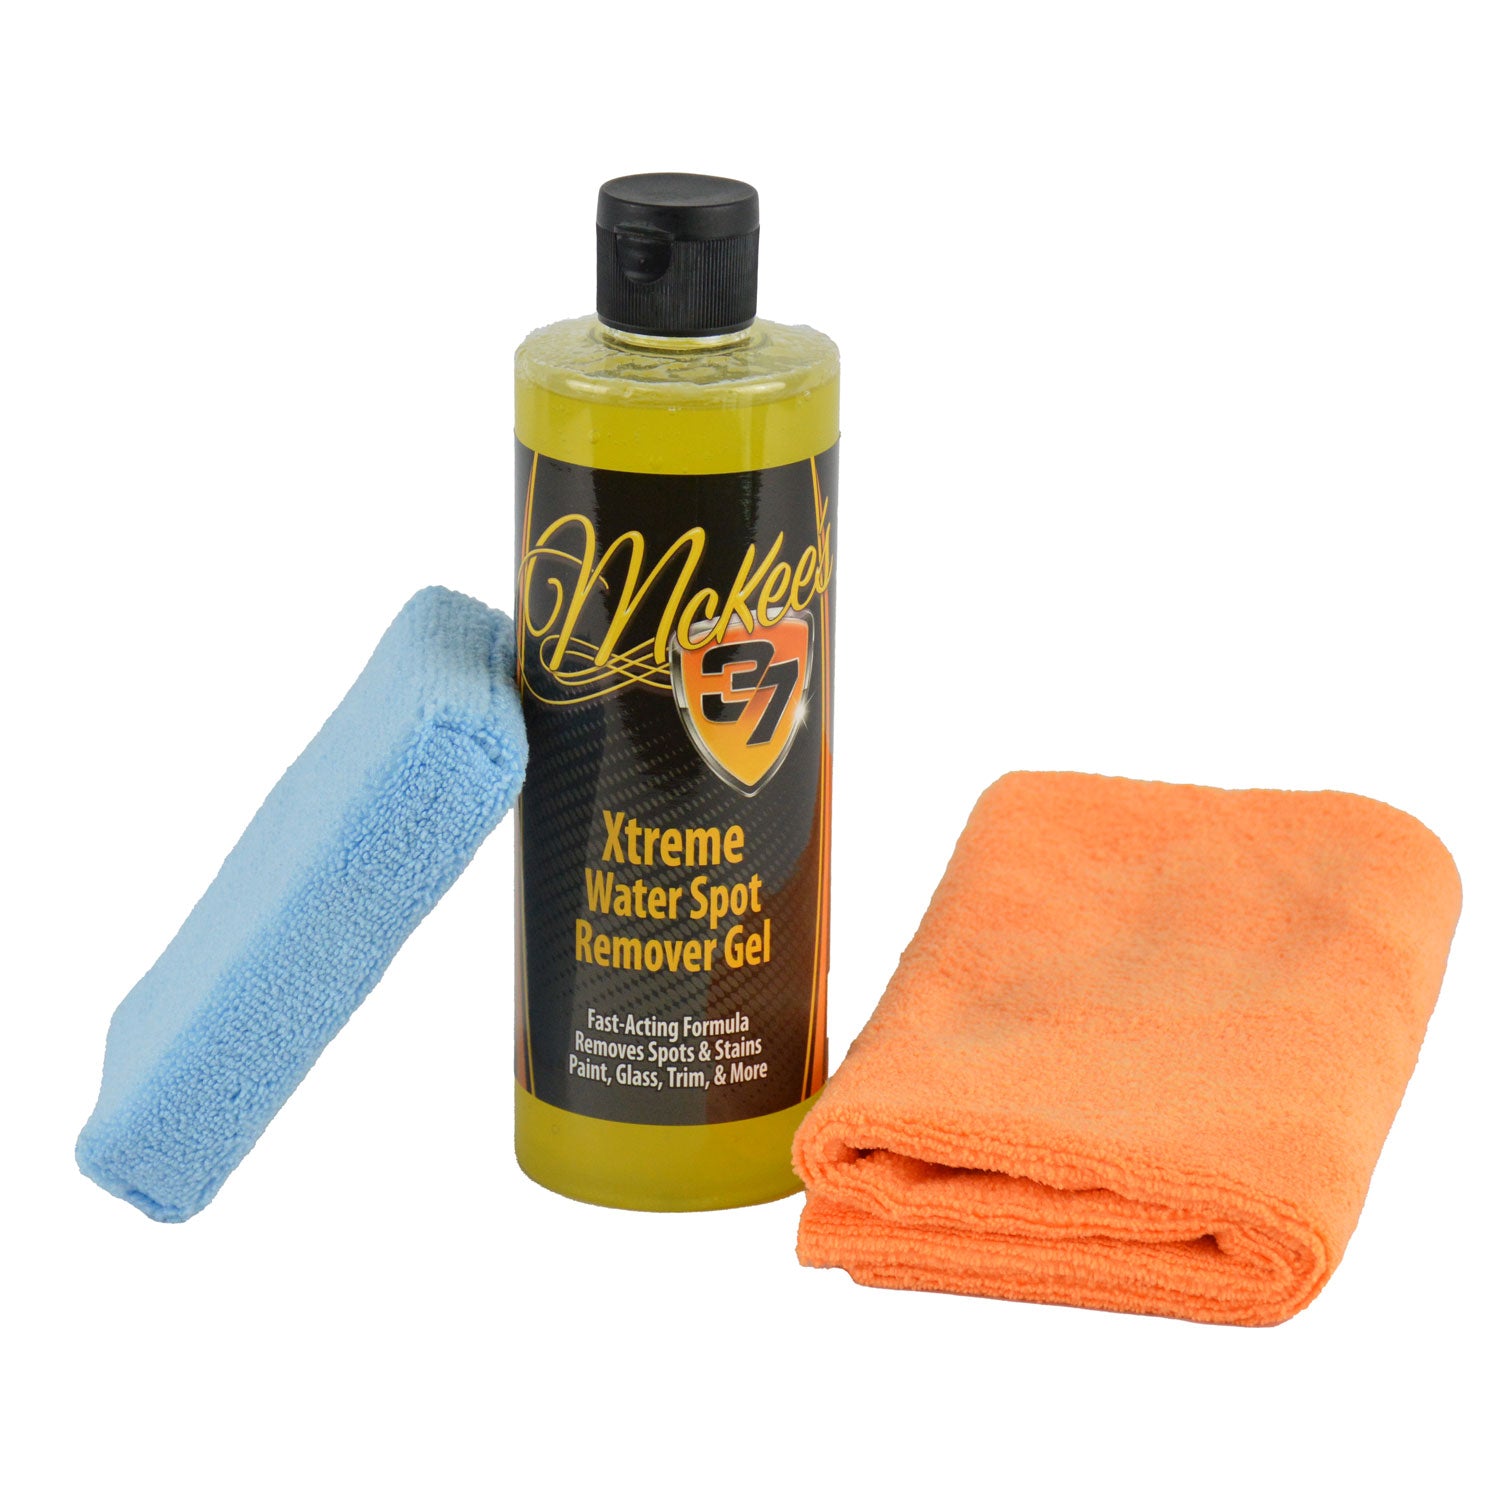 Xtreme Water Spot Remover Gel - INCLUDES TOWEL & APPLICATOR!